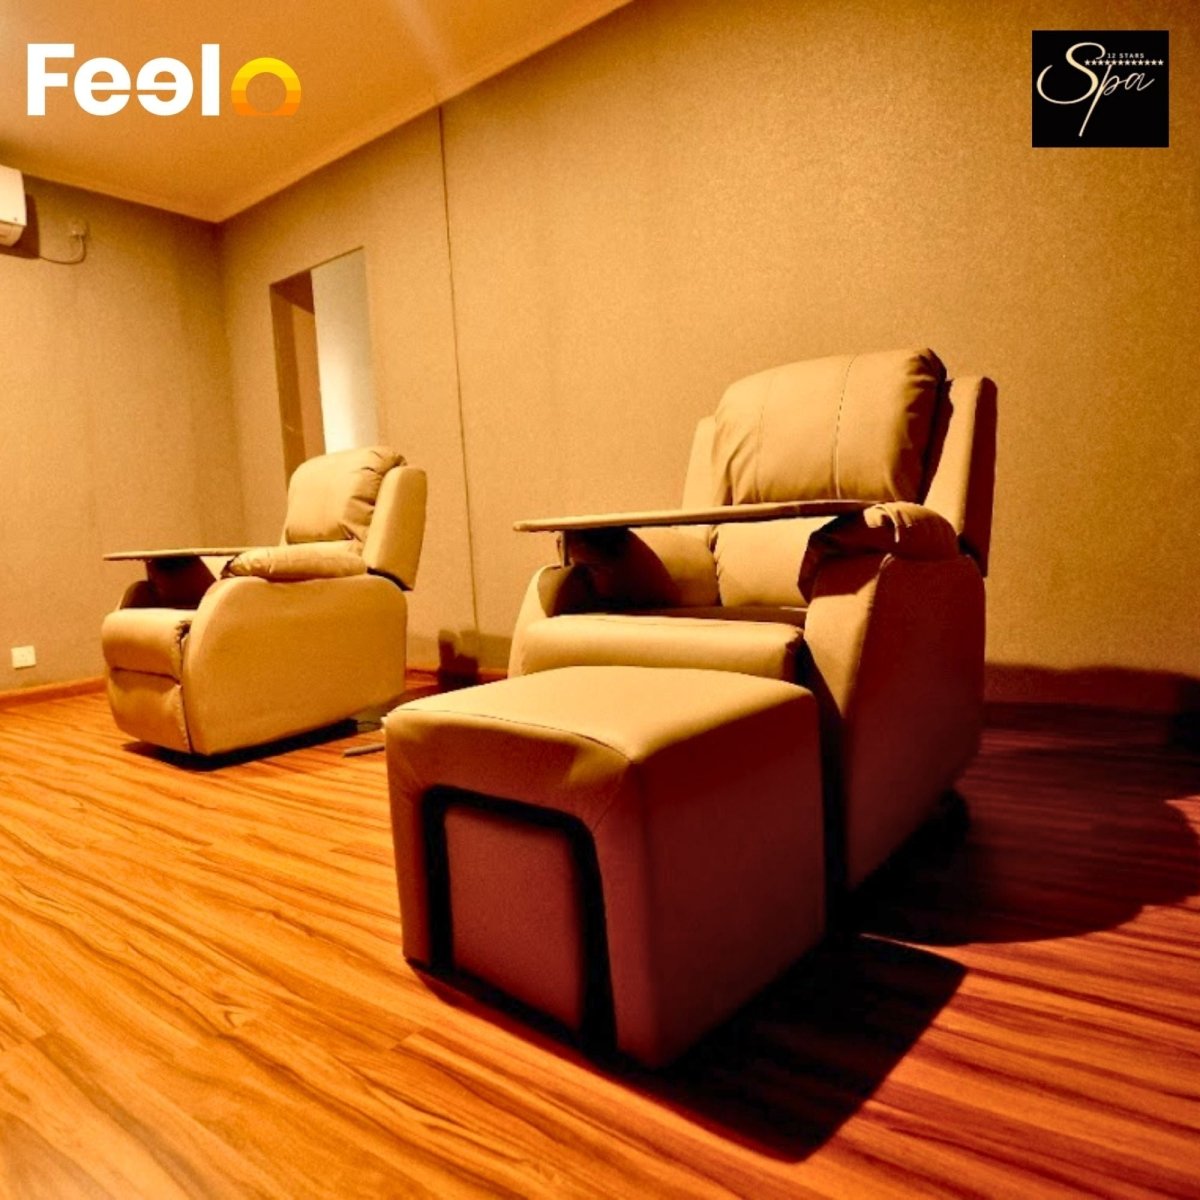 90min Light Pressure or Deep Tissue massage ritual by Foreign Therapist - 12 STARS Spa, Colombo 07 | Feelo